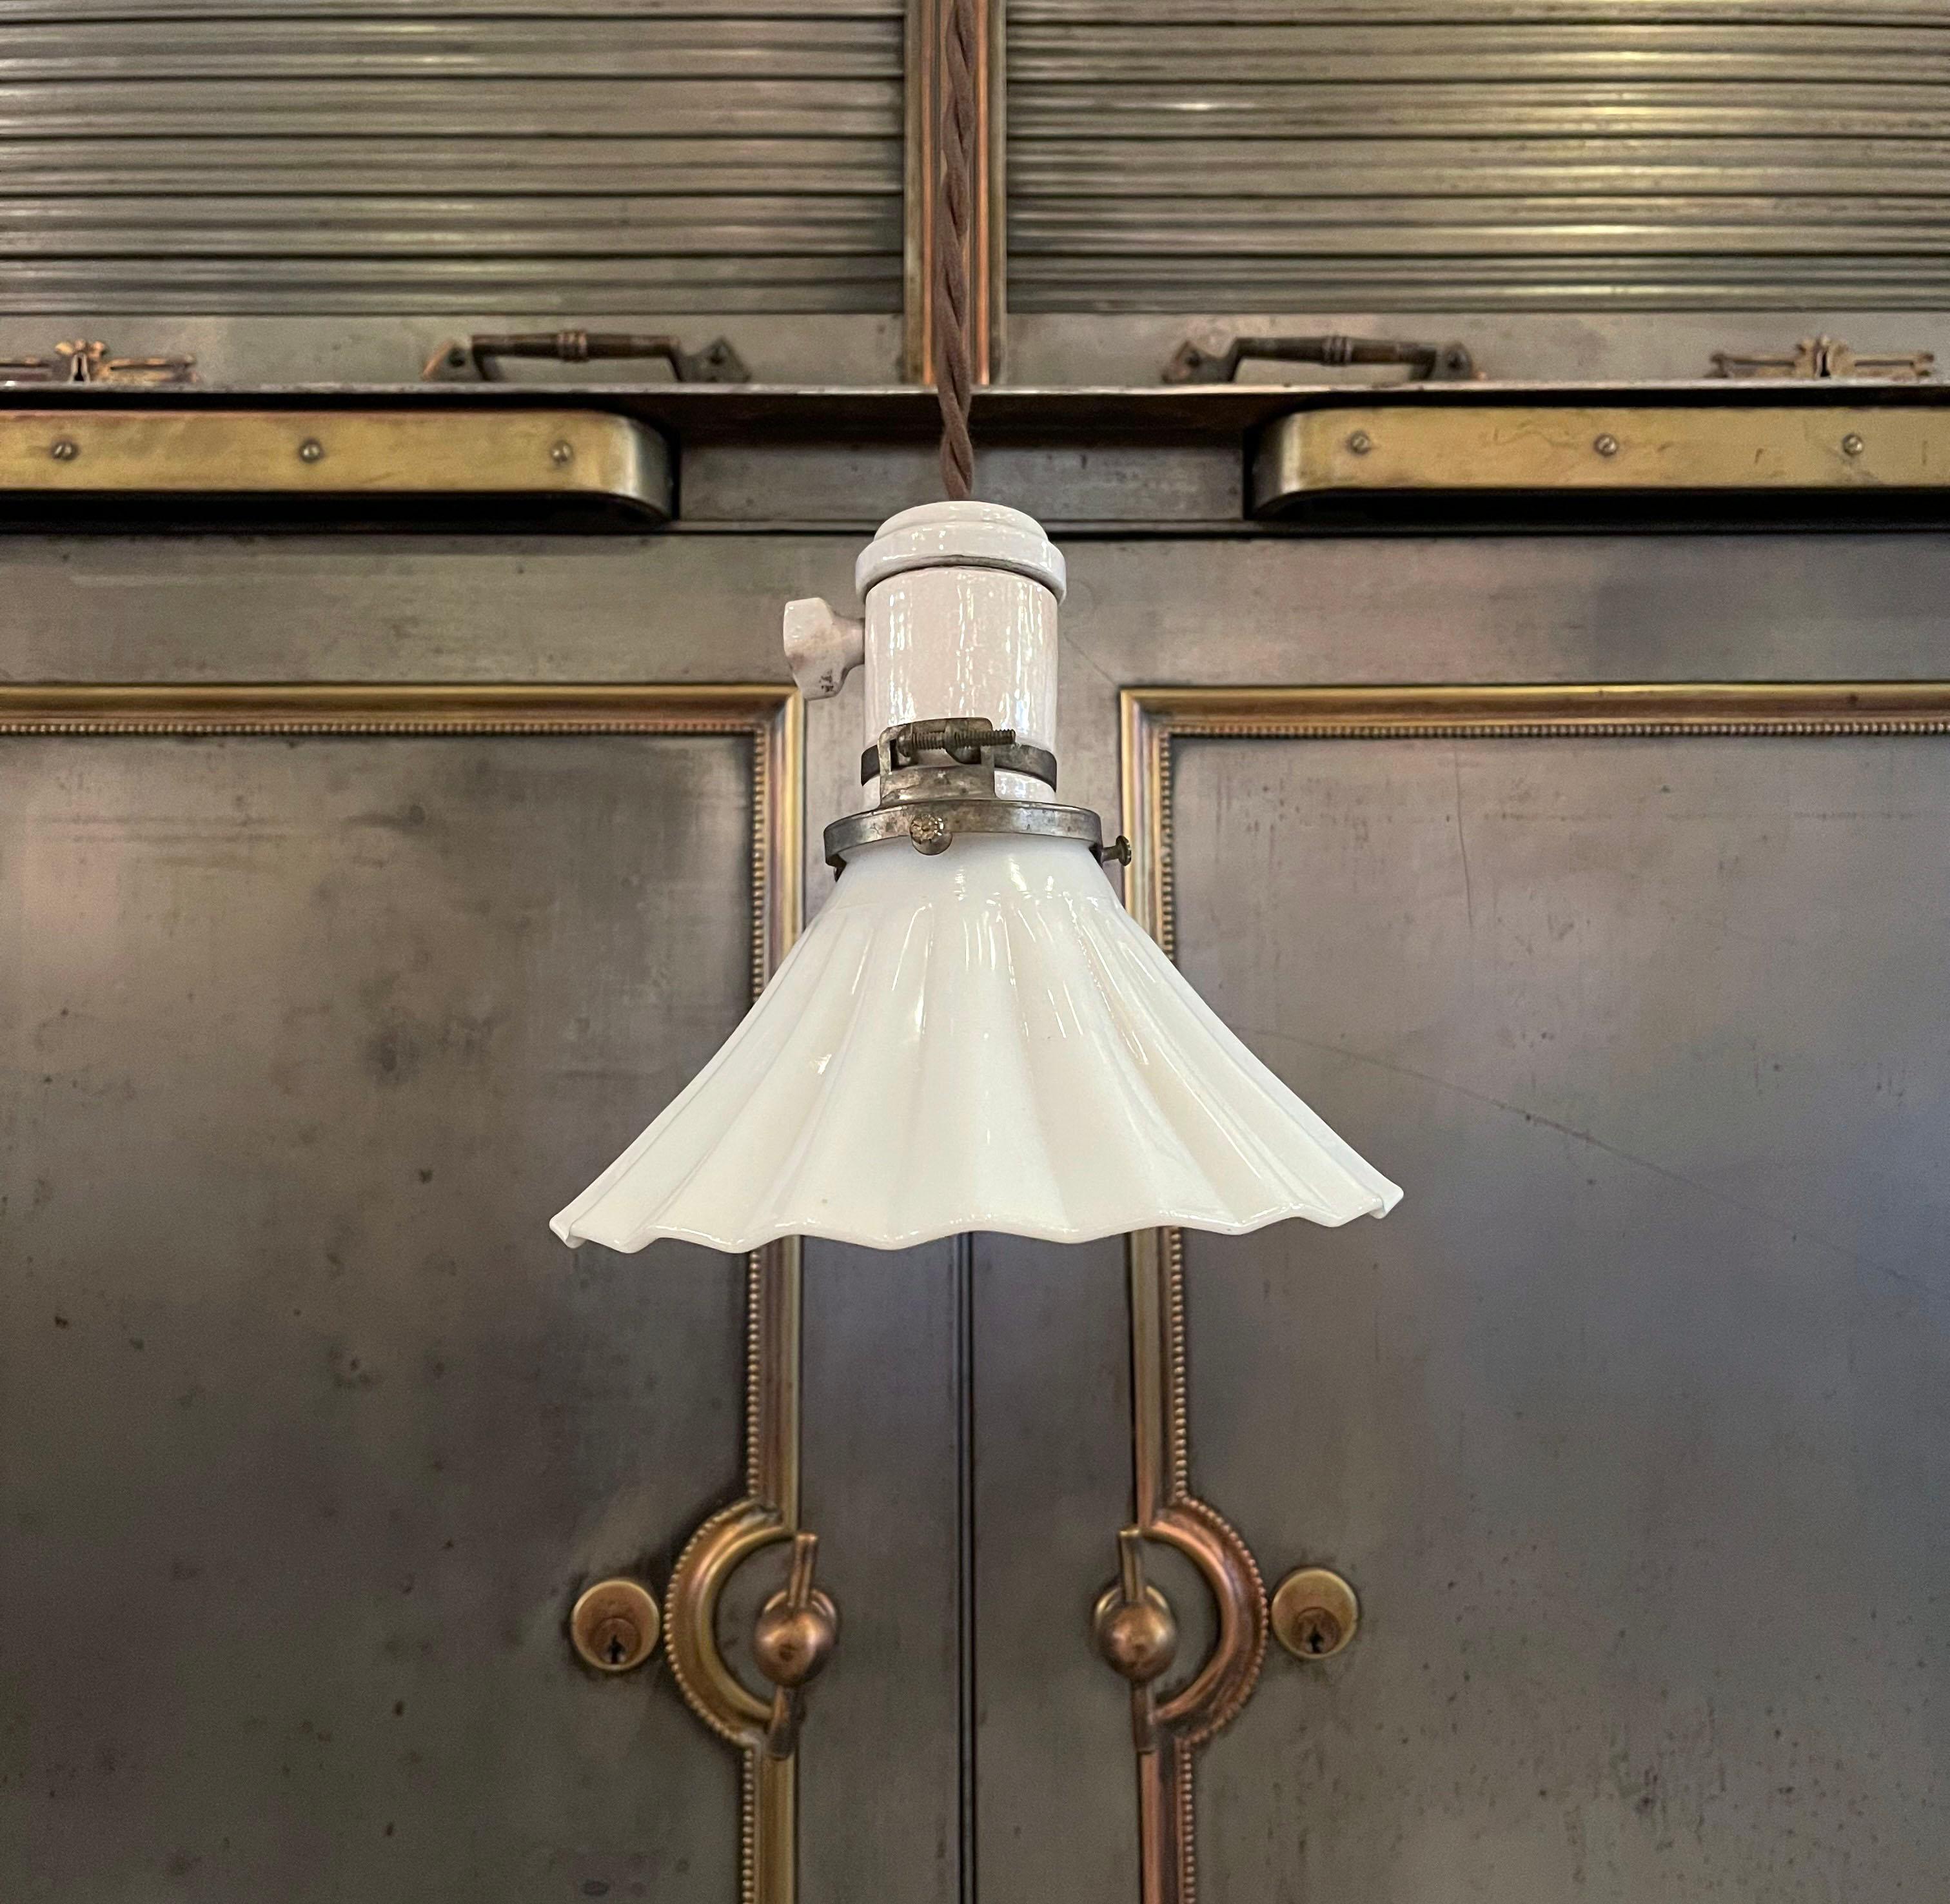 Petite, early 20th century pendant light with fluted milk glass shade and porcelain socket and canopy is newly wired with brown braided cloth cord to hang at an overall length of 33.5 inches. The canopy backplate measures 3.5 inches diameter.